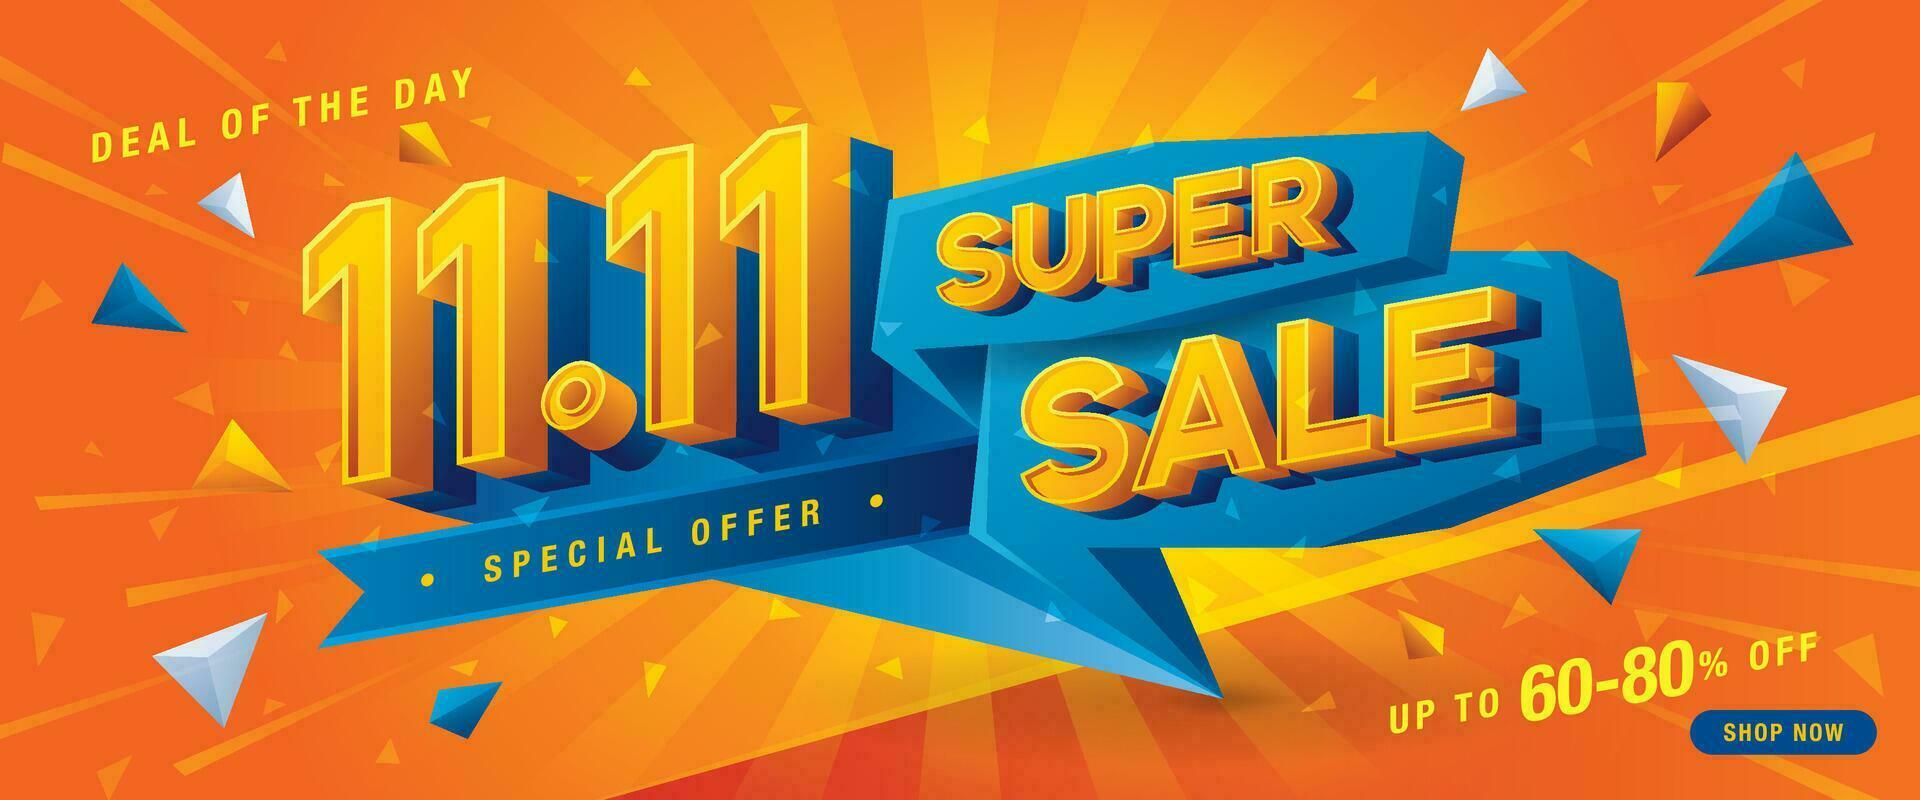 11.11 Shopping Day Super Sale Banner Template design special offer discount vector